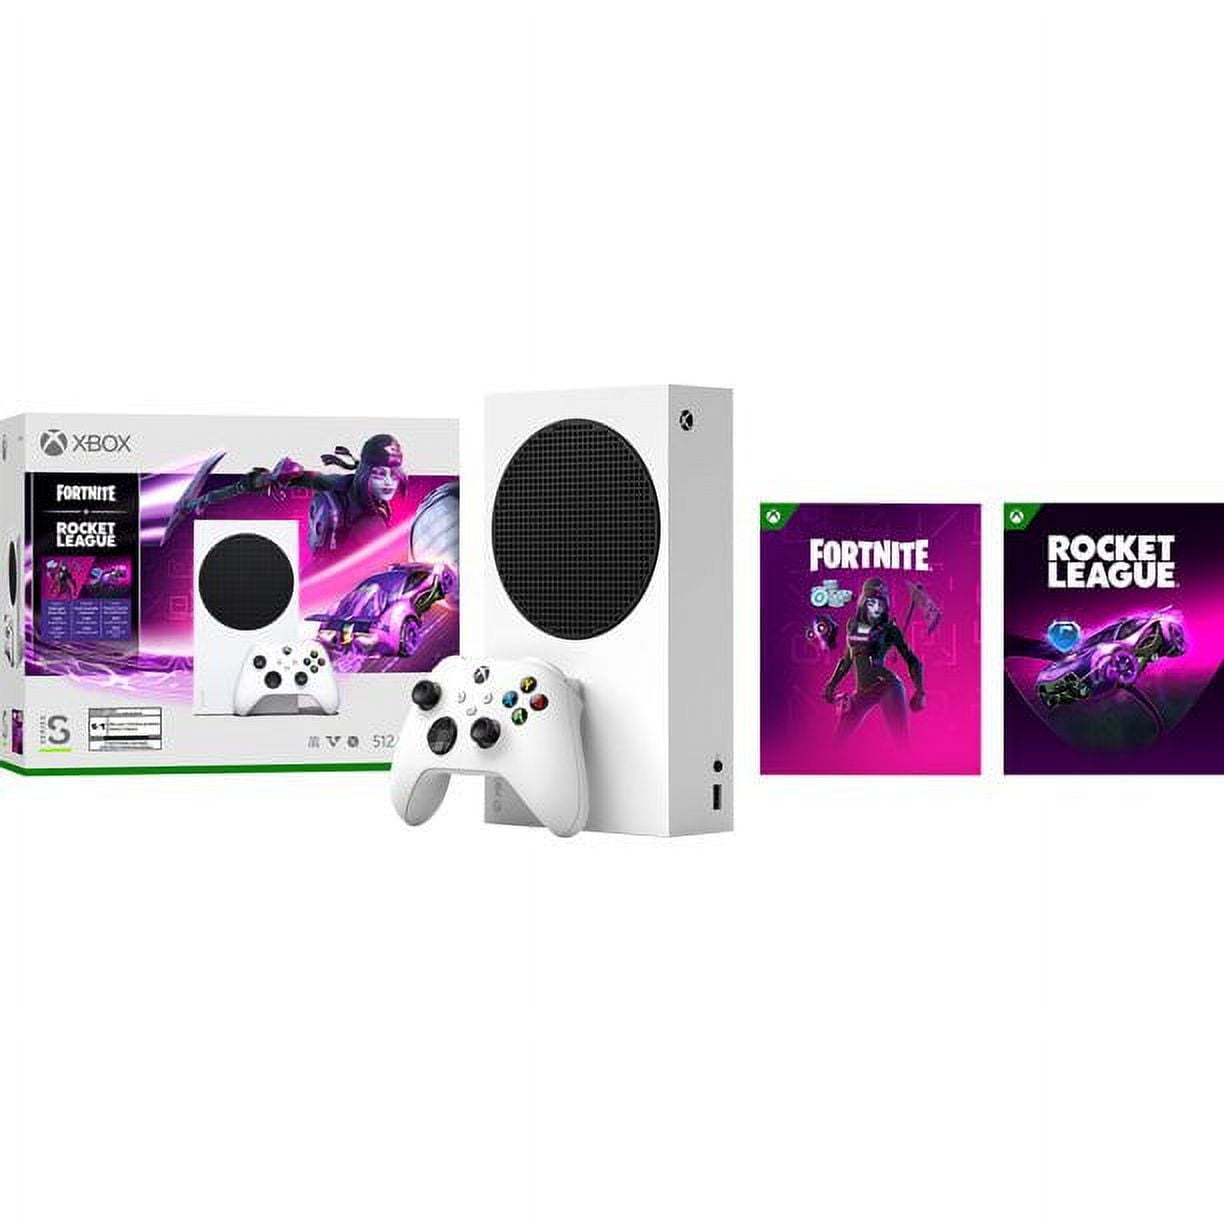 Microsoft Launches Xbox Series S Fortnite and Rocket League Bundle